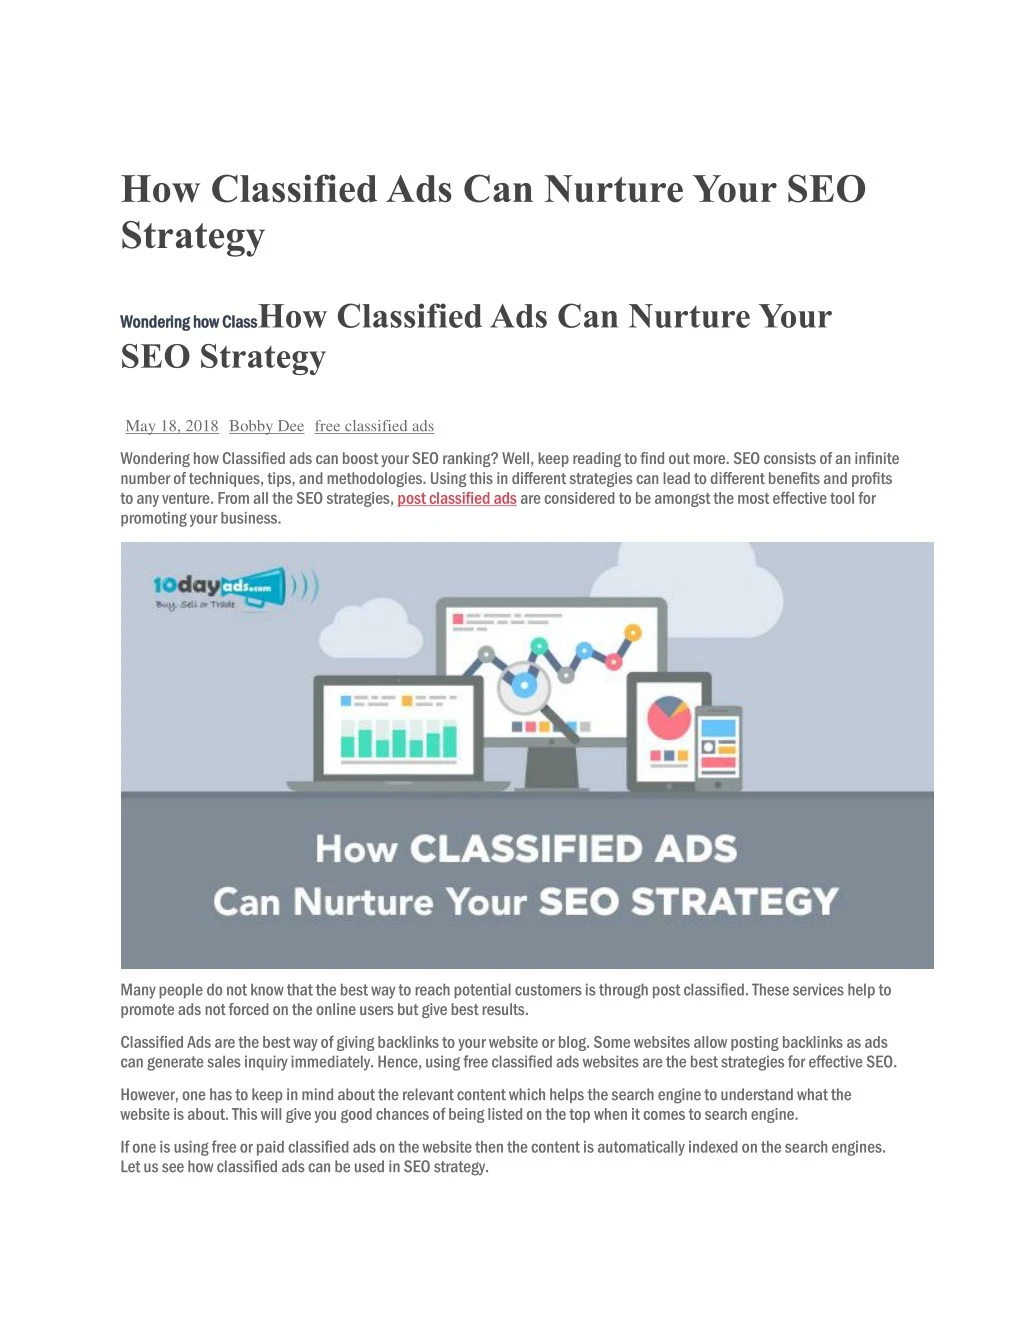 how classified ads can nurture your seo strategy